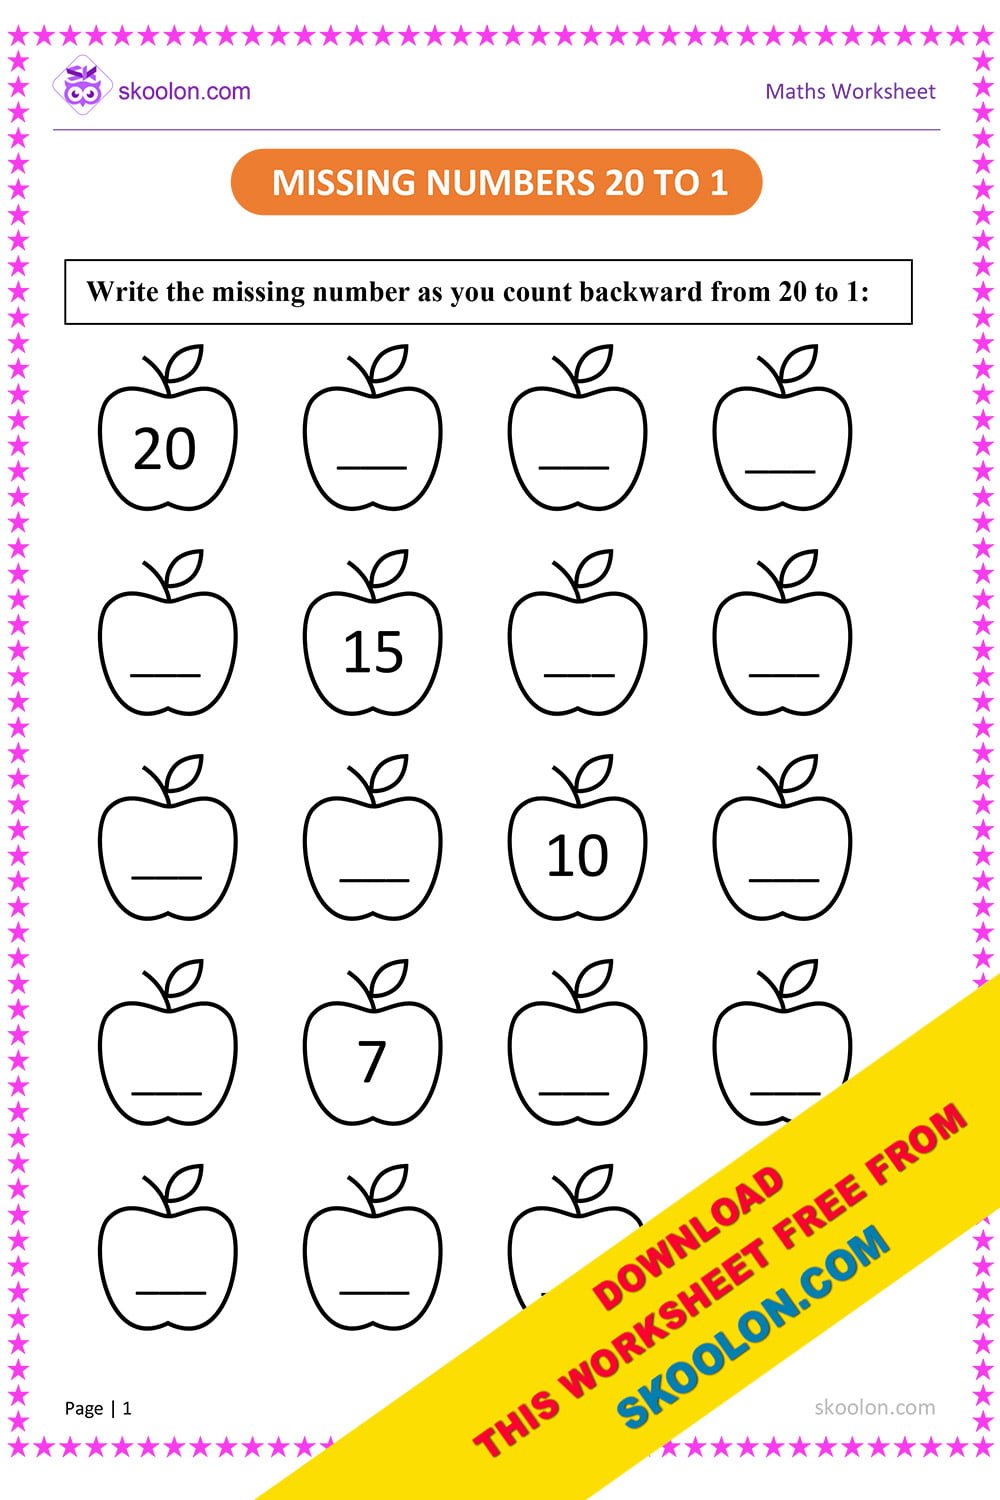 Adding Numbers To 20 Worksheet